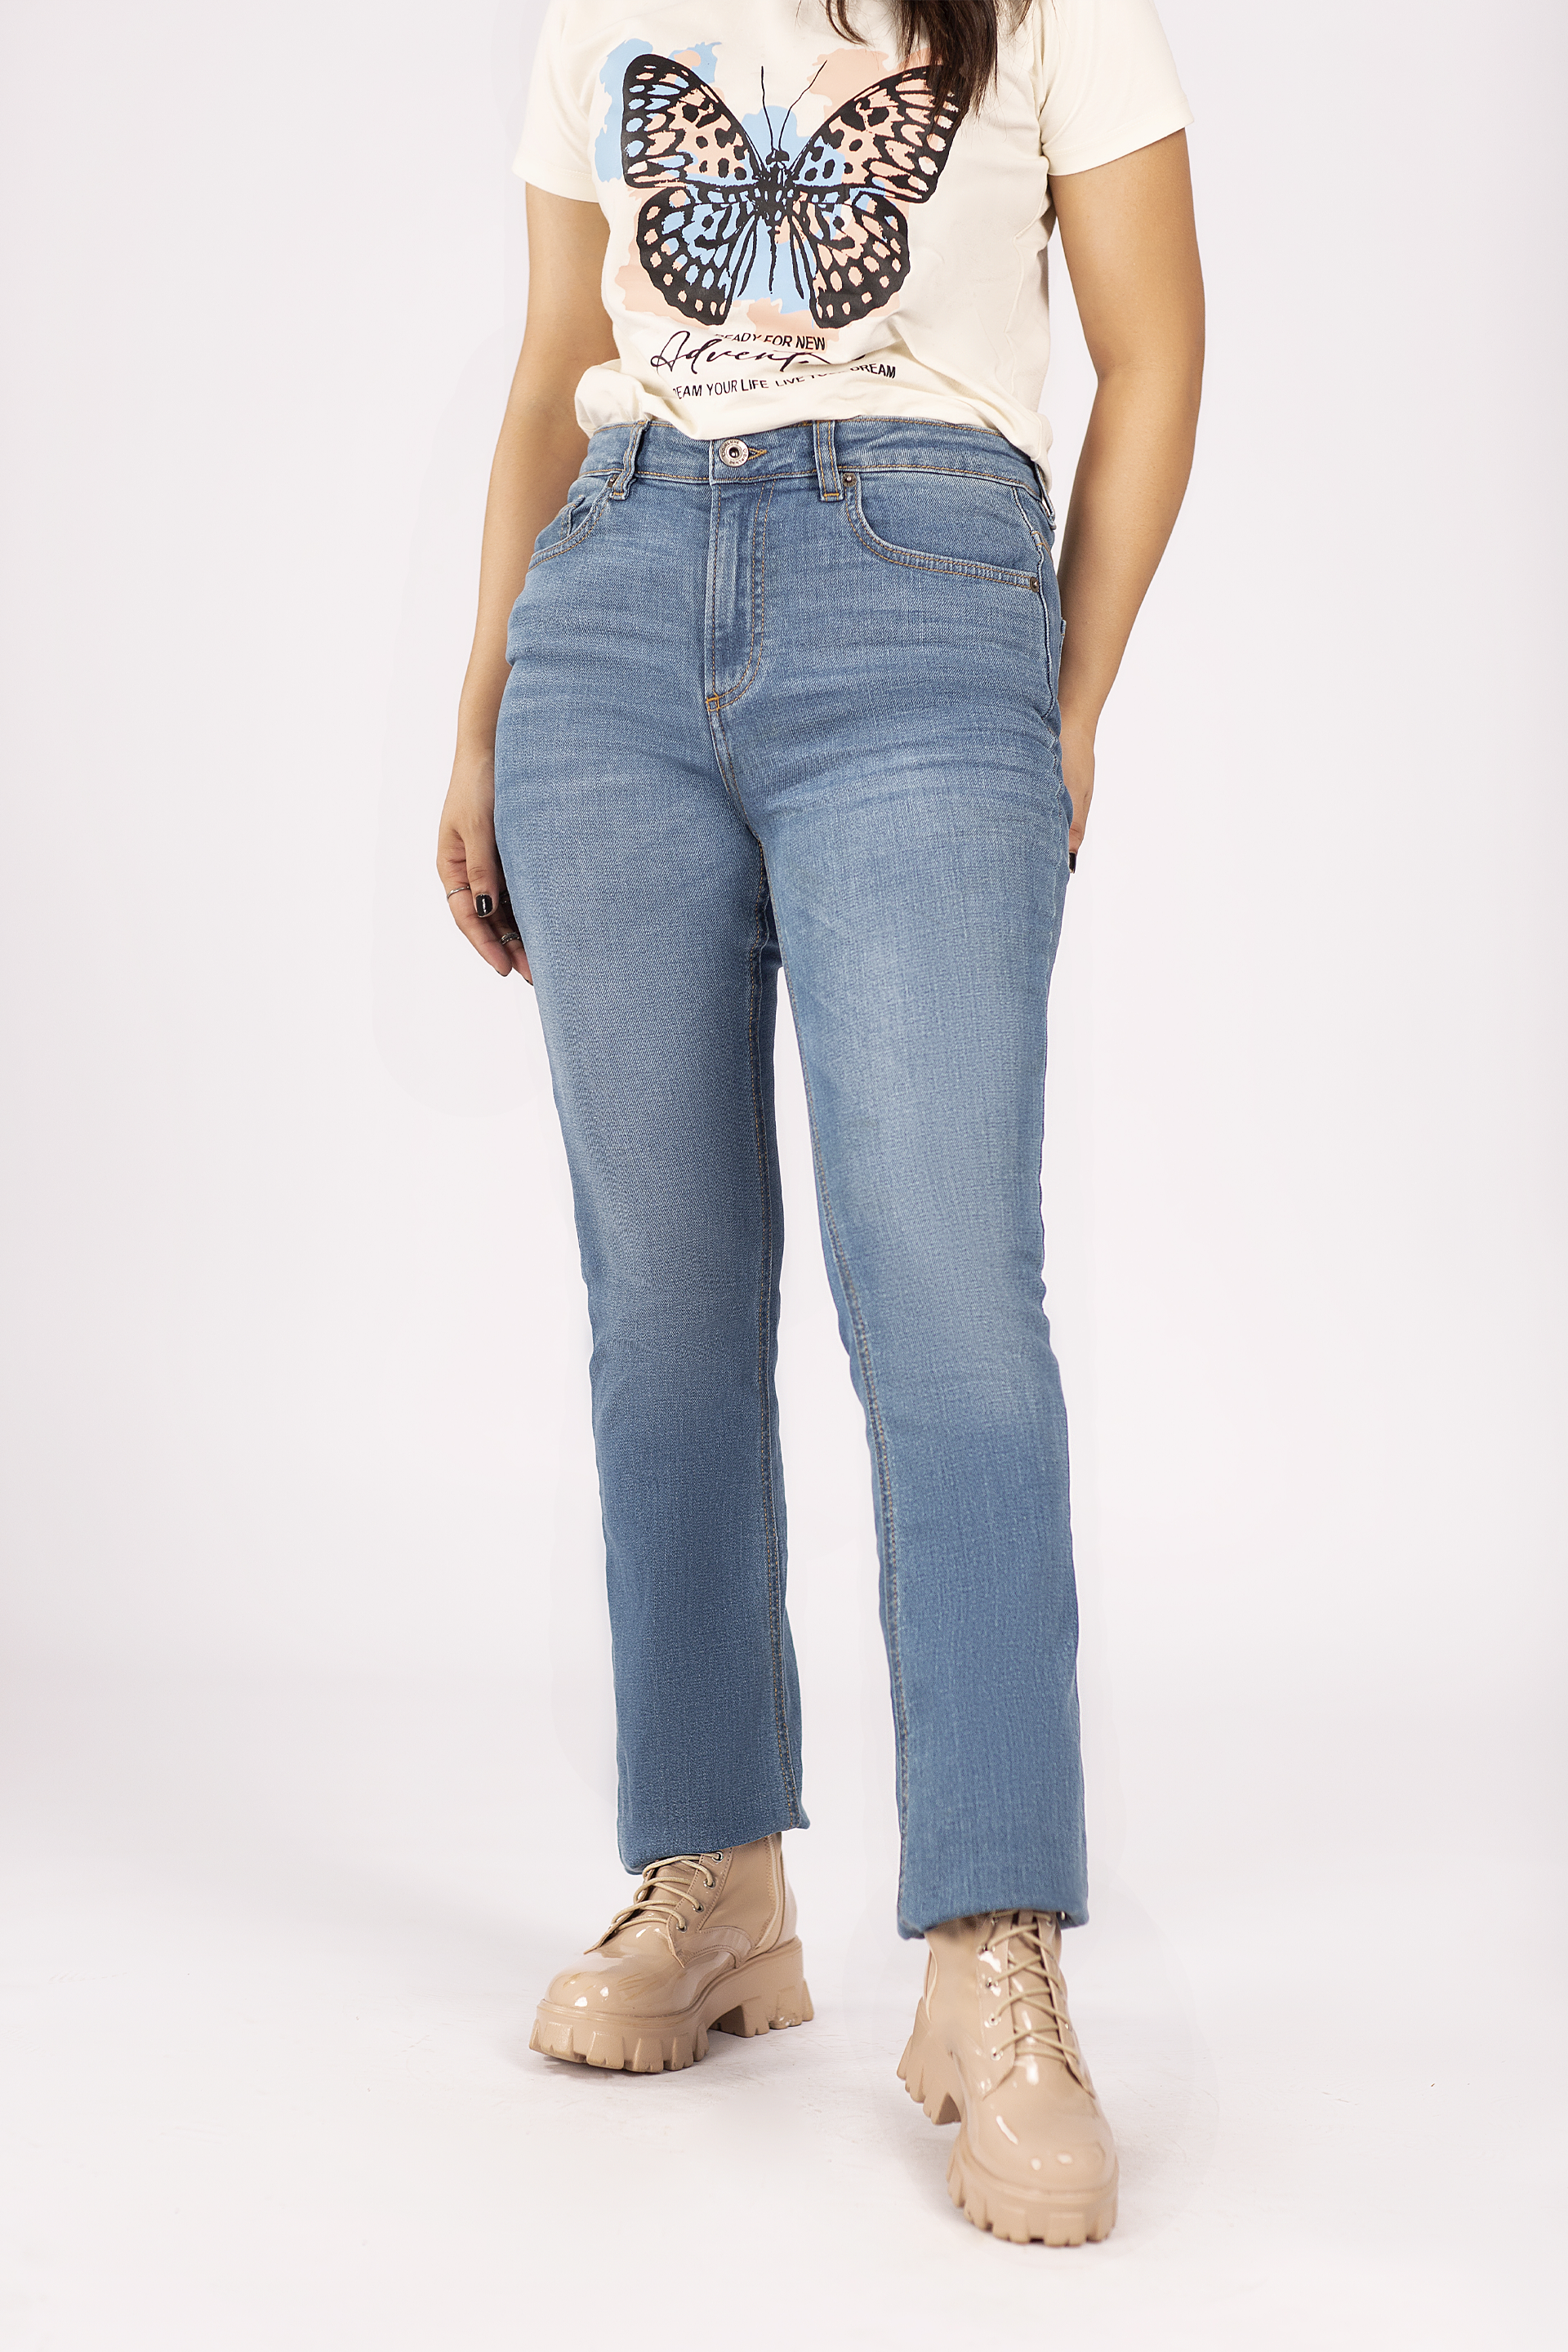 Wide Leg Jeans for Women High Waisted Button Fly Stretch Jeans Casual Baggy  Washed Straight Denim Pants with Pocket - Walmart.com